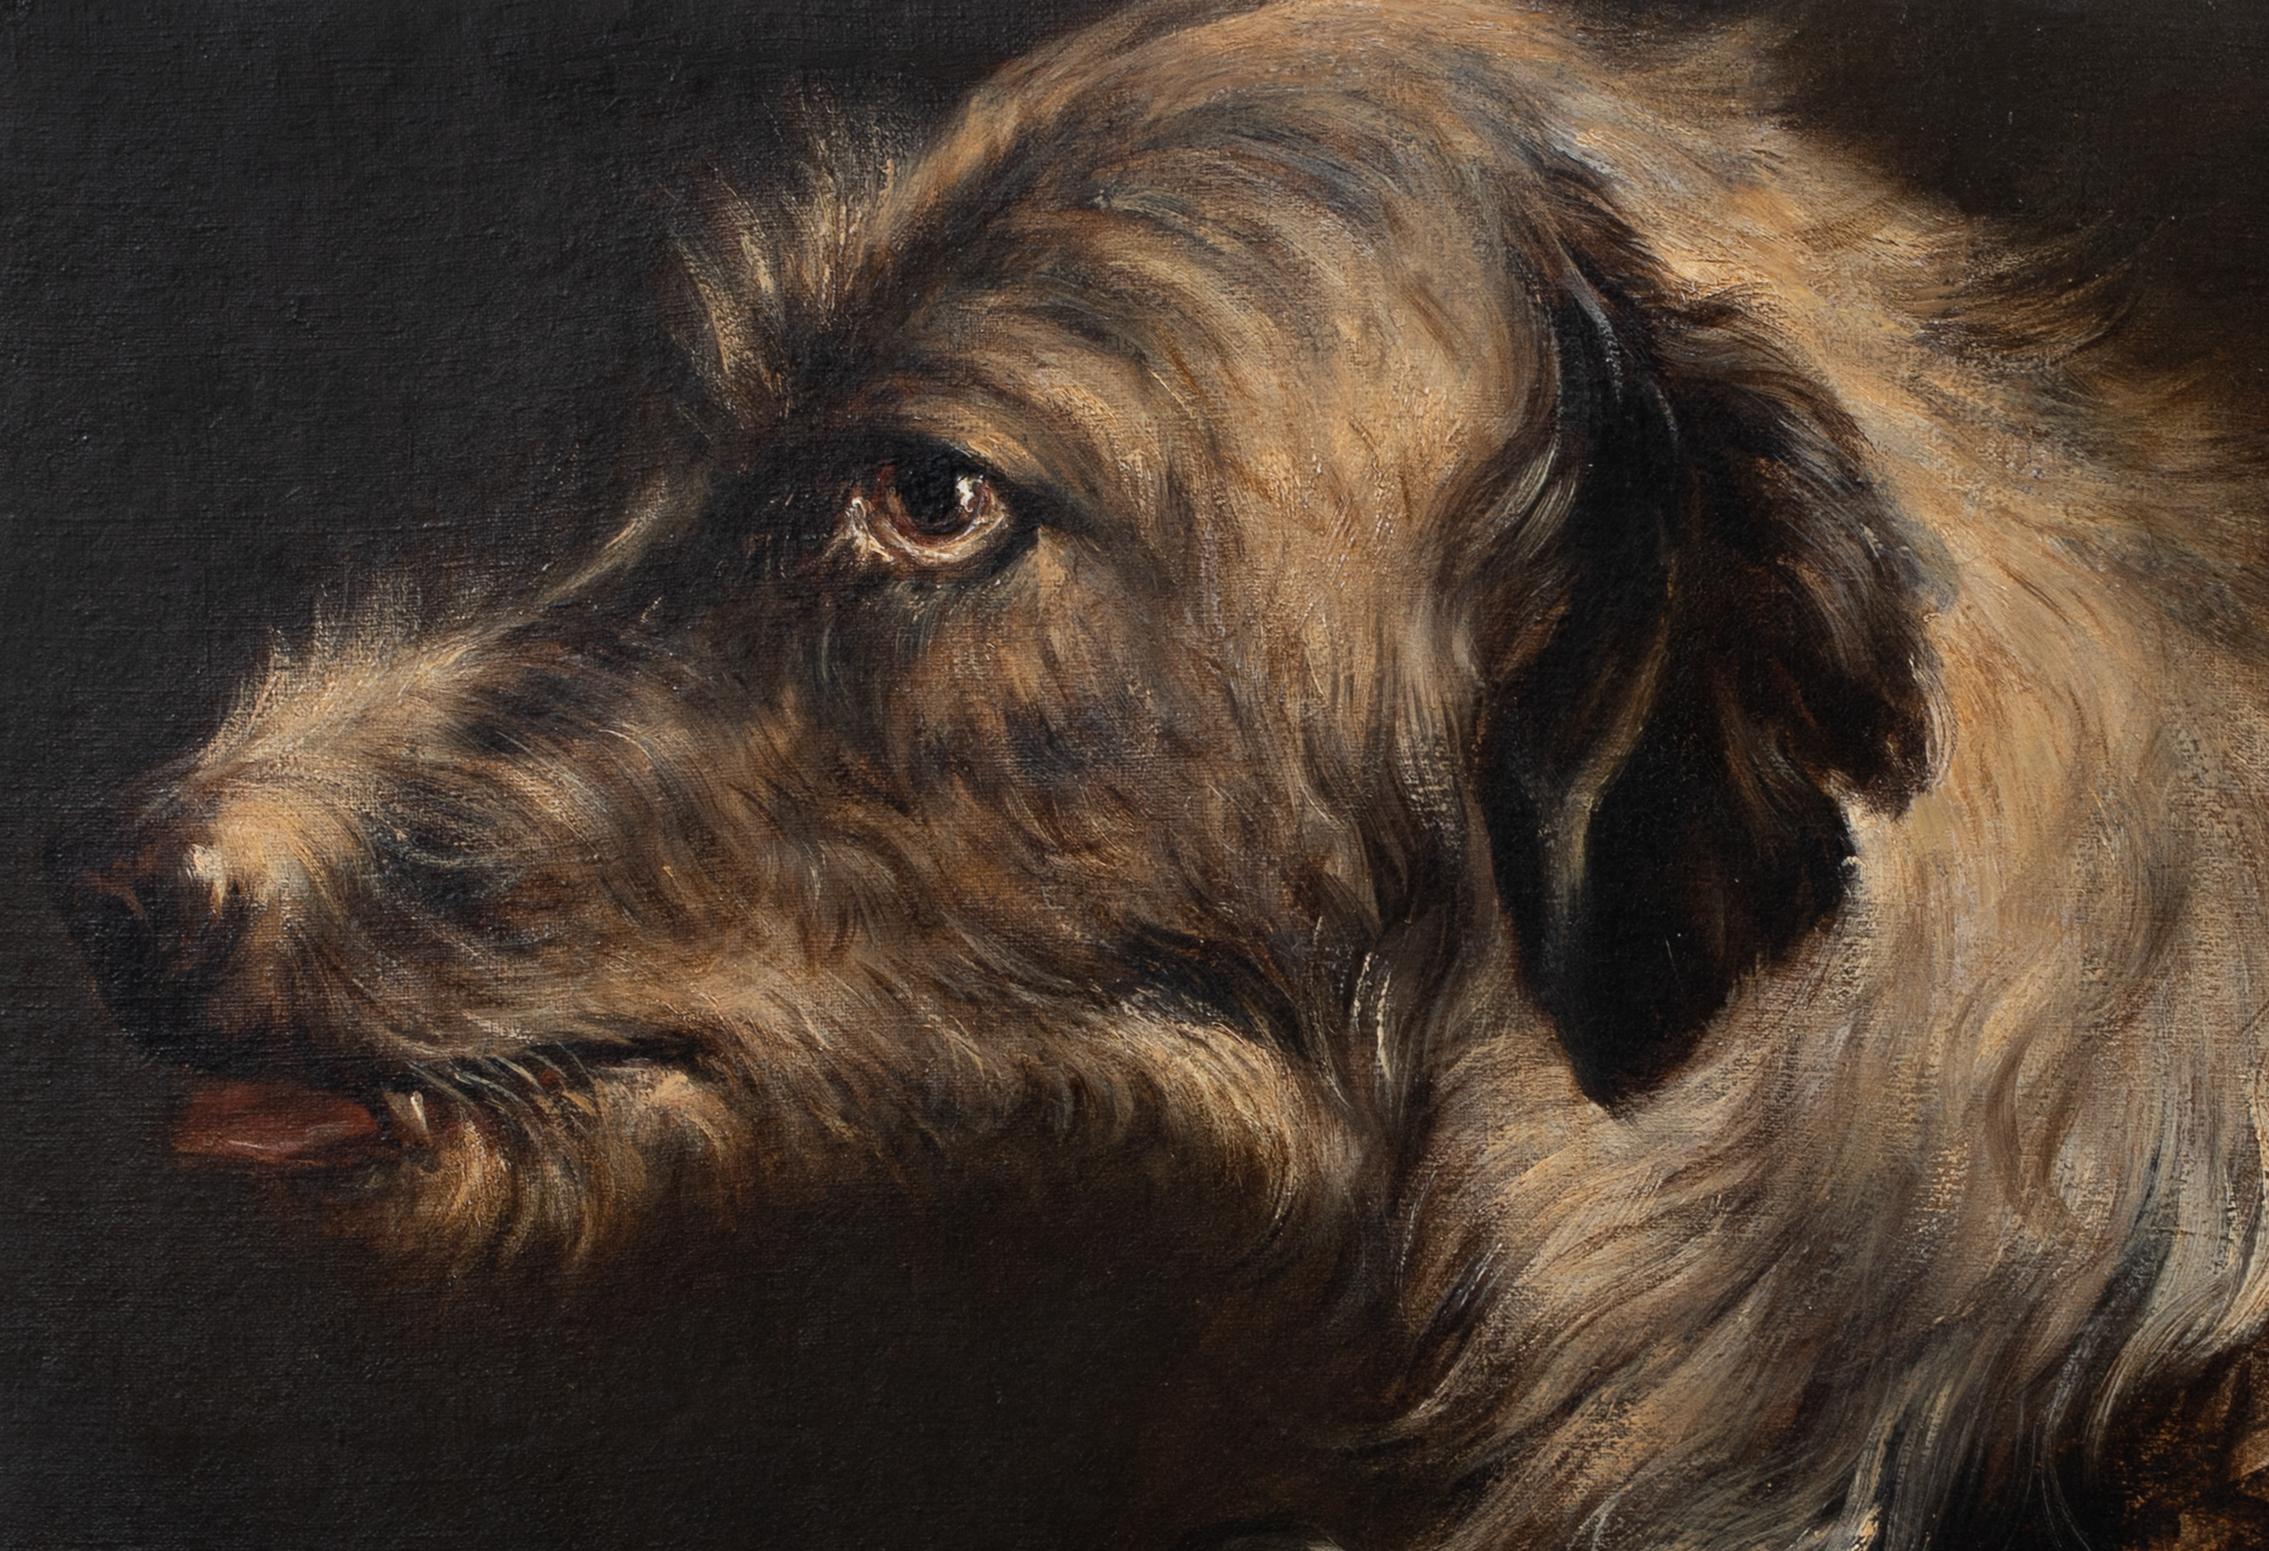 Portrait of An Irish Wolfhound, 19th century

attributed to Edwin Henry LANDSEER (1802-1873)

Large 19th Century portrait of an Irish Wolfhound, oil on canvas attributed to Edwin Landseer. Excellent quality and condition side profile head study